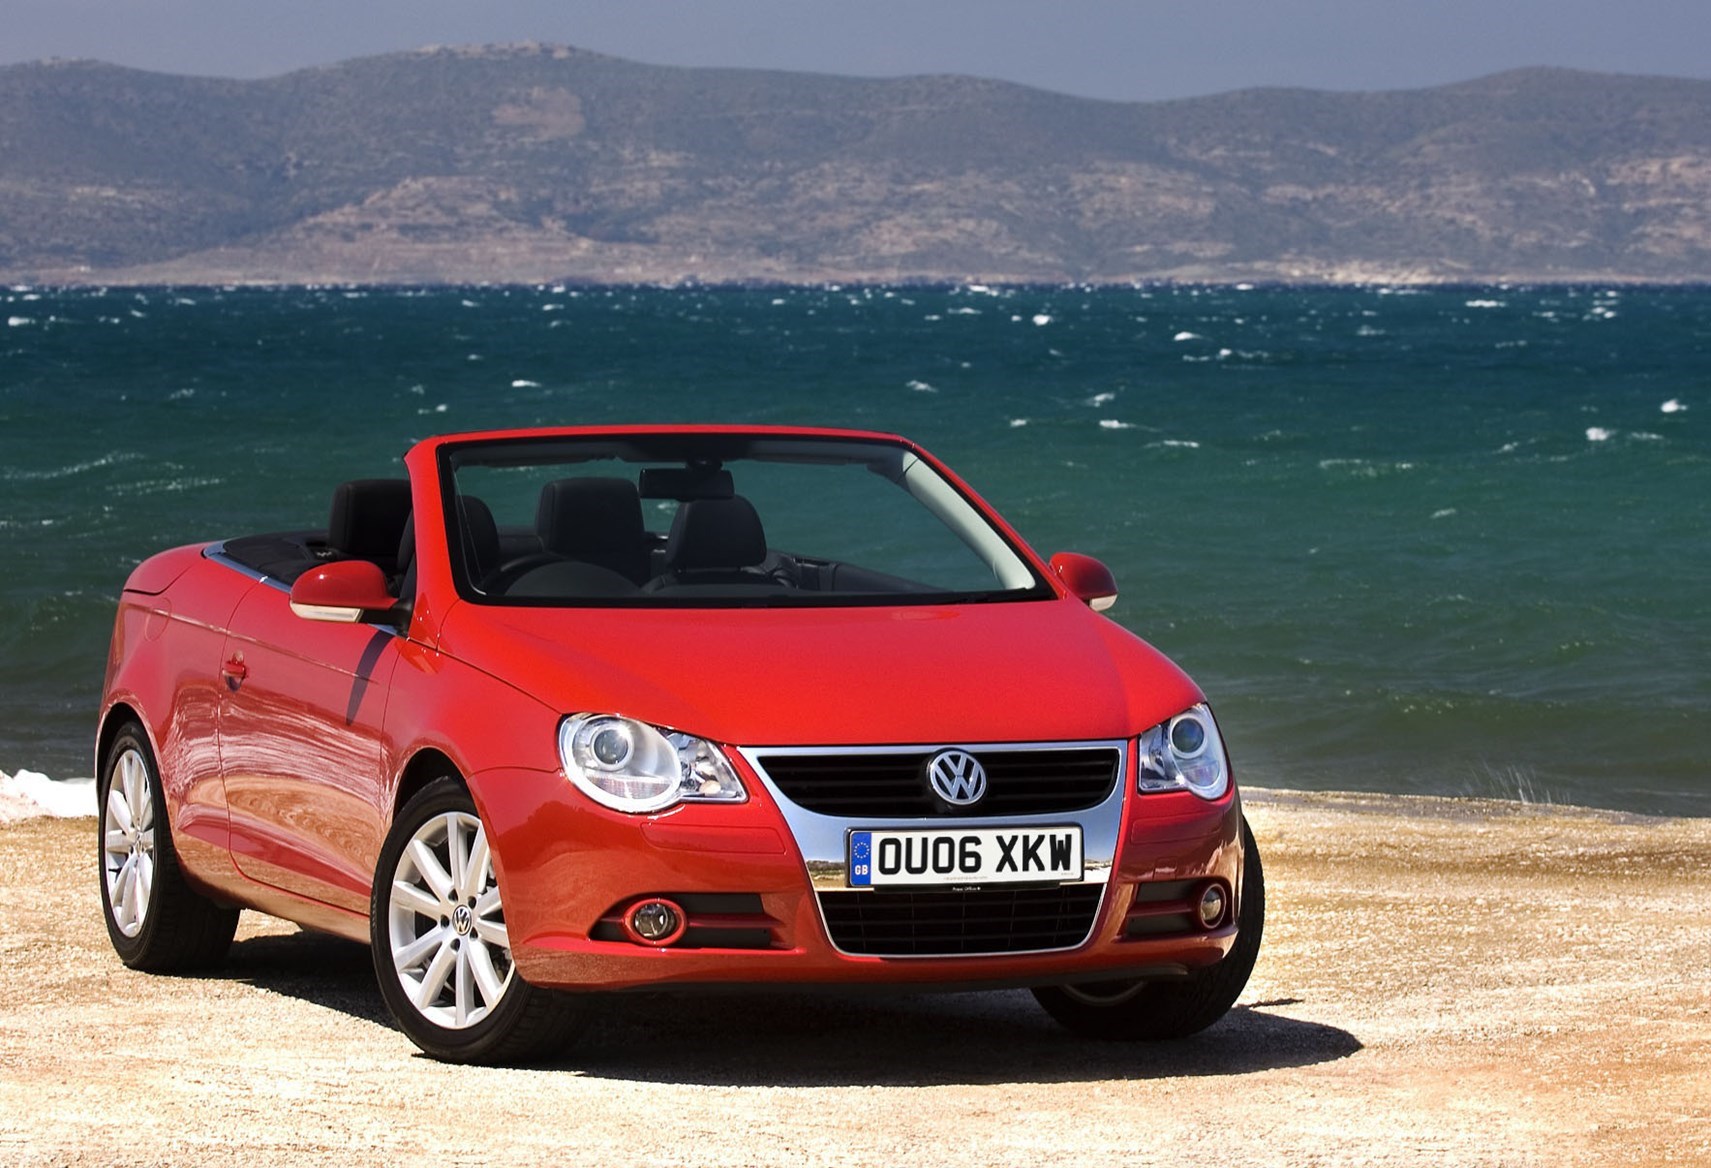 Volkswagen Eos - Used car buying guide | Parkers